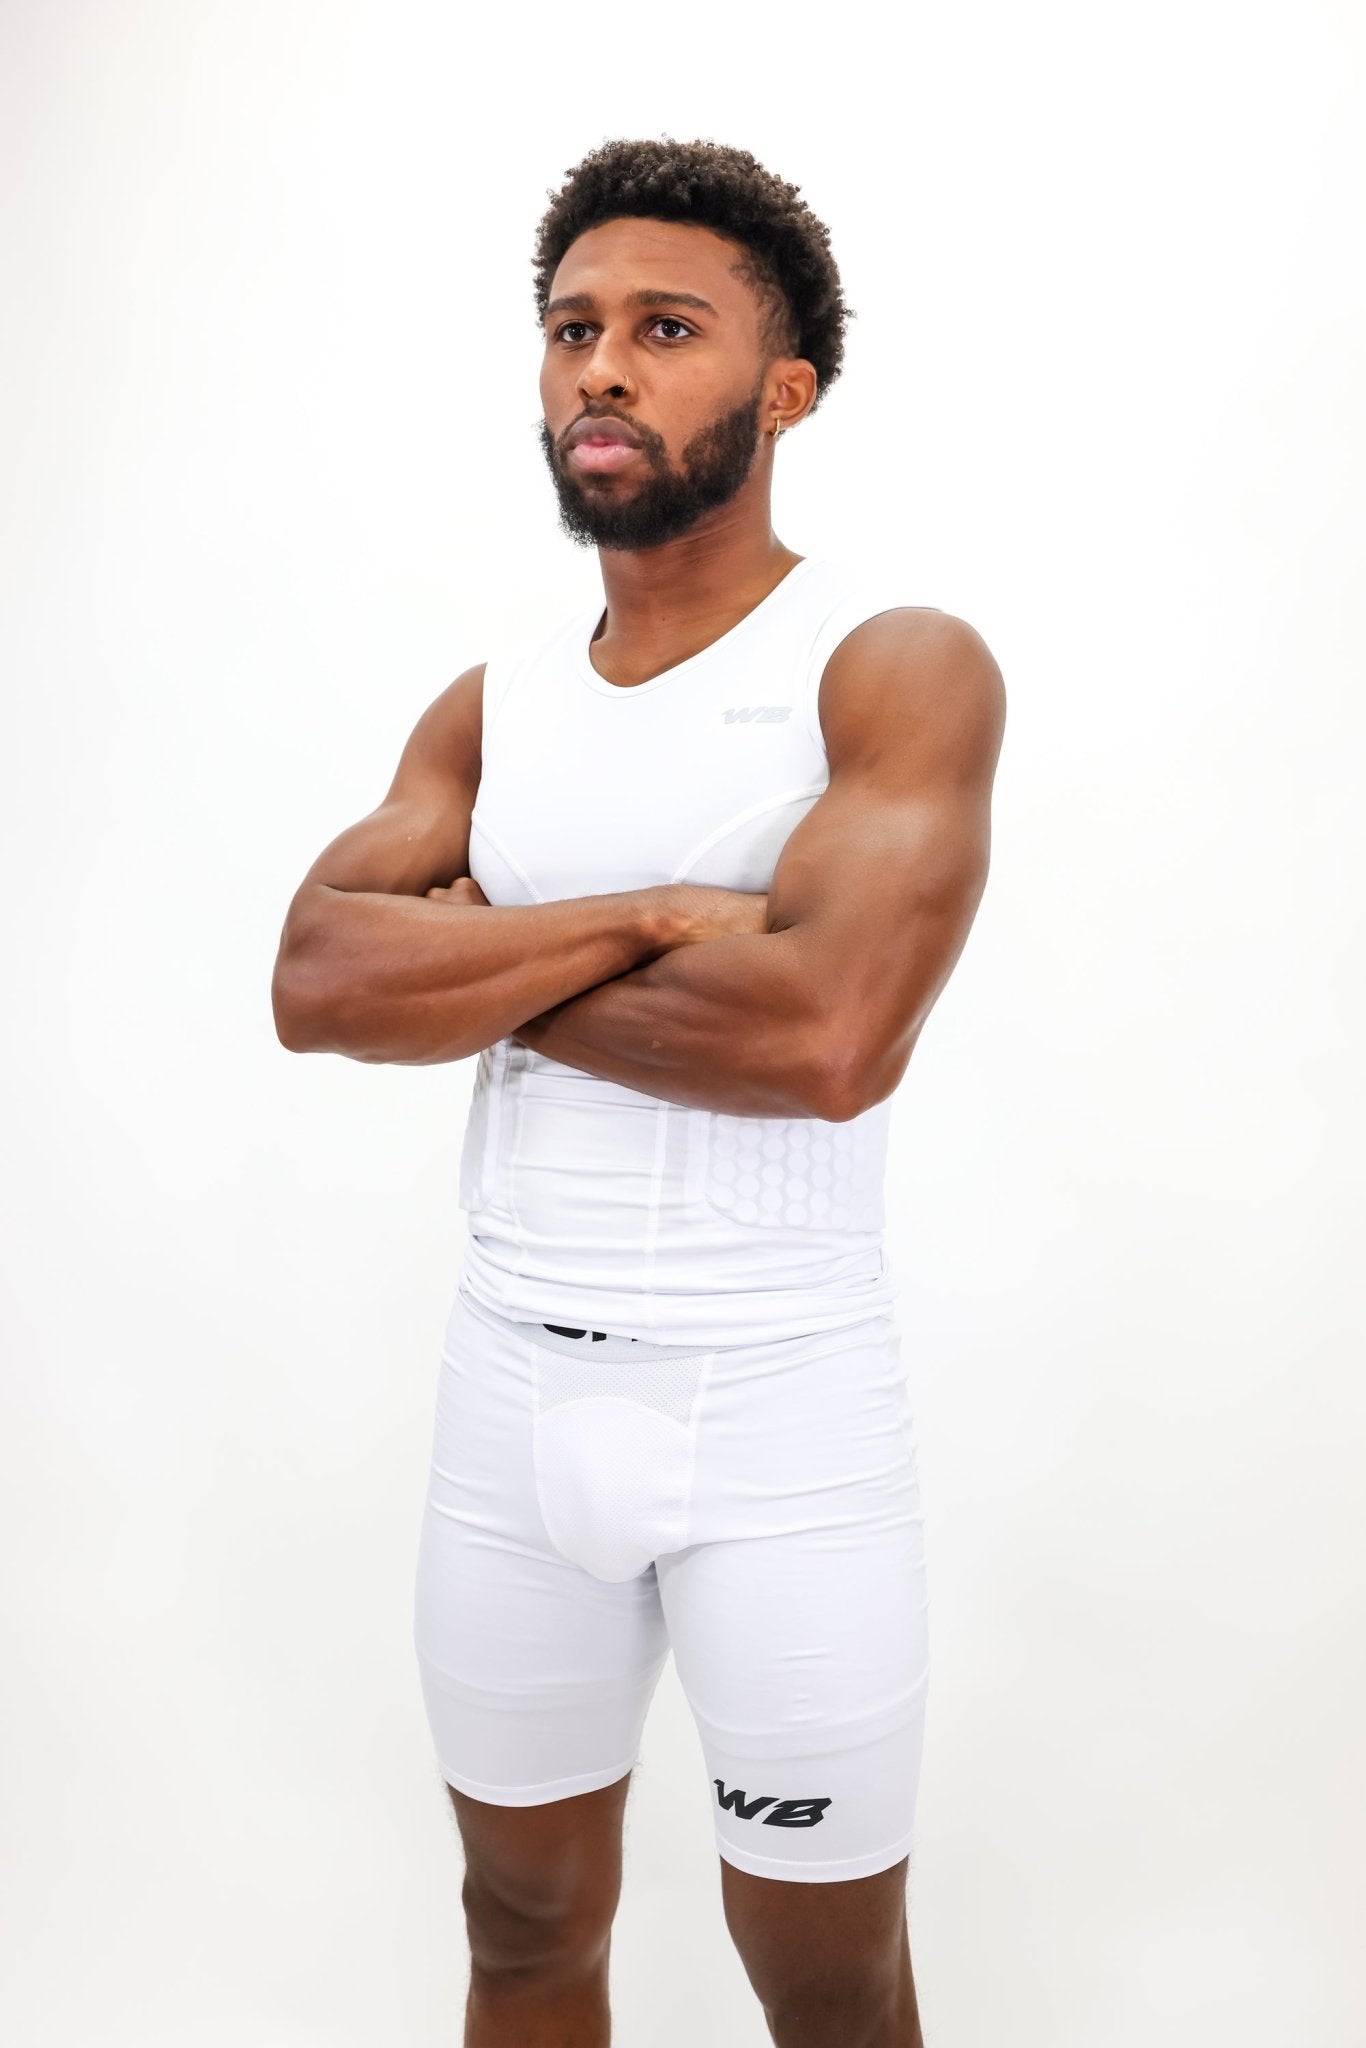 PADDED TANK-TOP (WHITE) - We Ball Sports